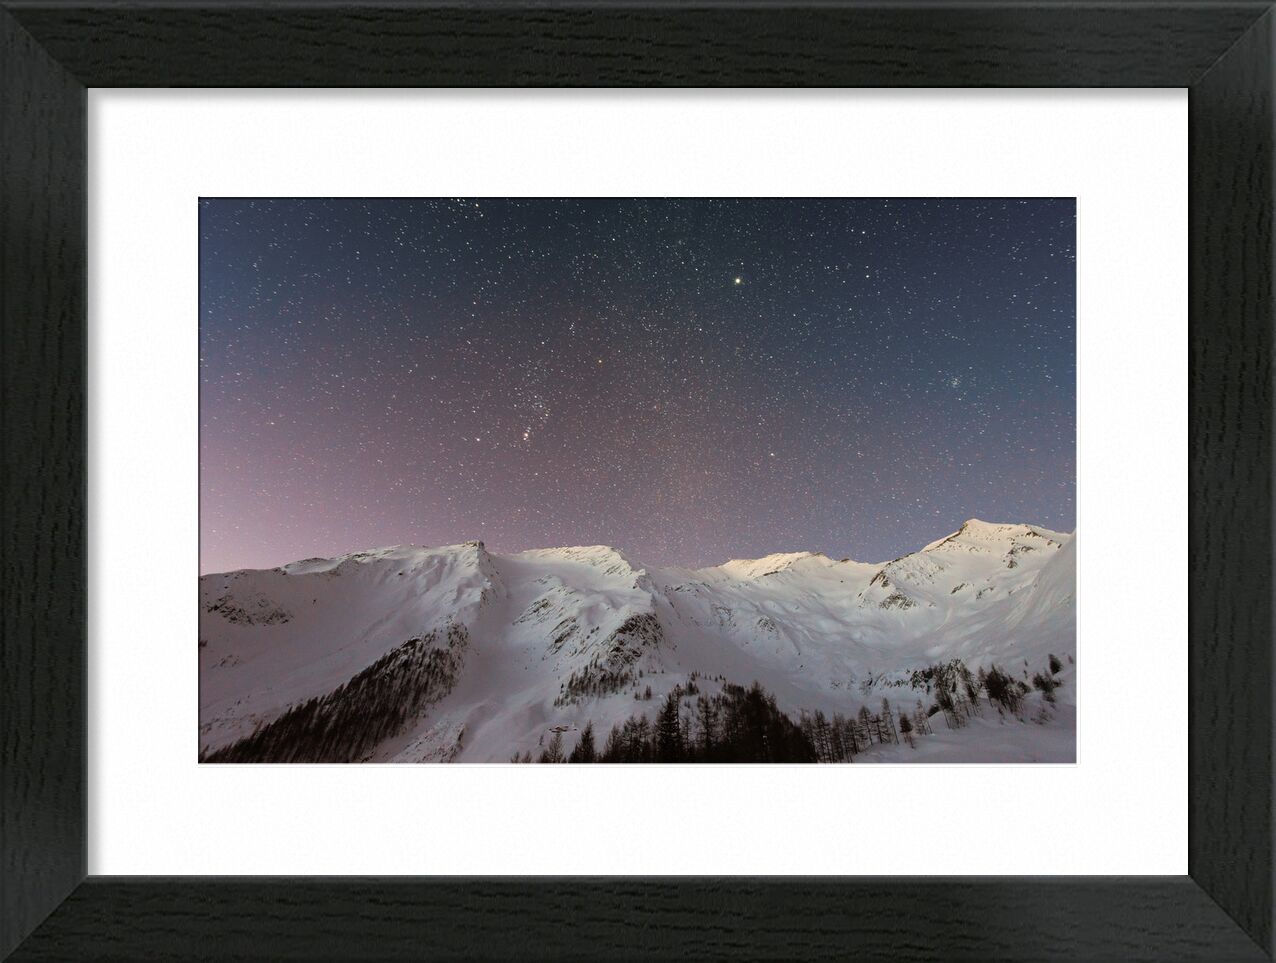 The stars under the mountain from Pierre Gaultier, Prodi Art, adventure, cold, evening, frosty, frozen, high, icy, idyllic, landscape, nature, night, outdoors, peaceful, scenery, scenic, sky, snow, space, stars, tranquil, travel, trees, winter, conifers, exploration, fir trees, mountain, nightscape, nightsky, pine trees, snowy, universe, weather